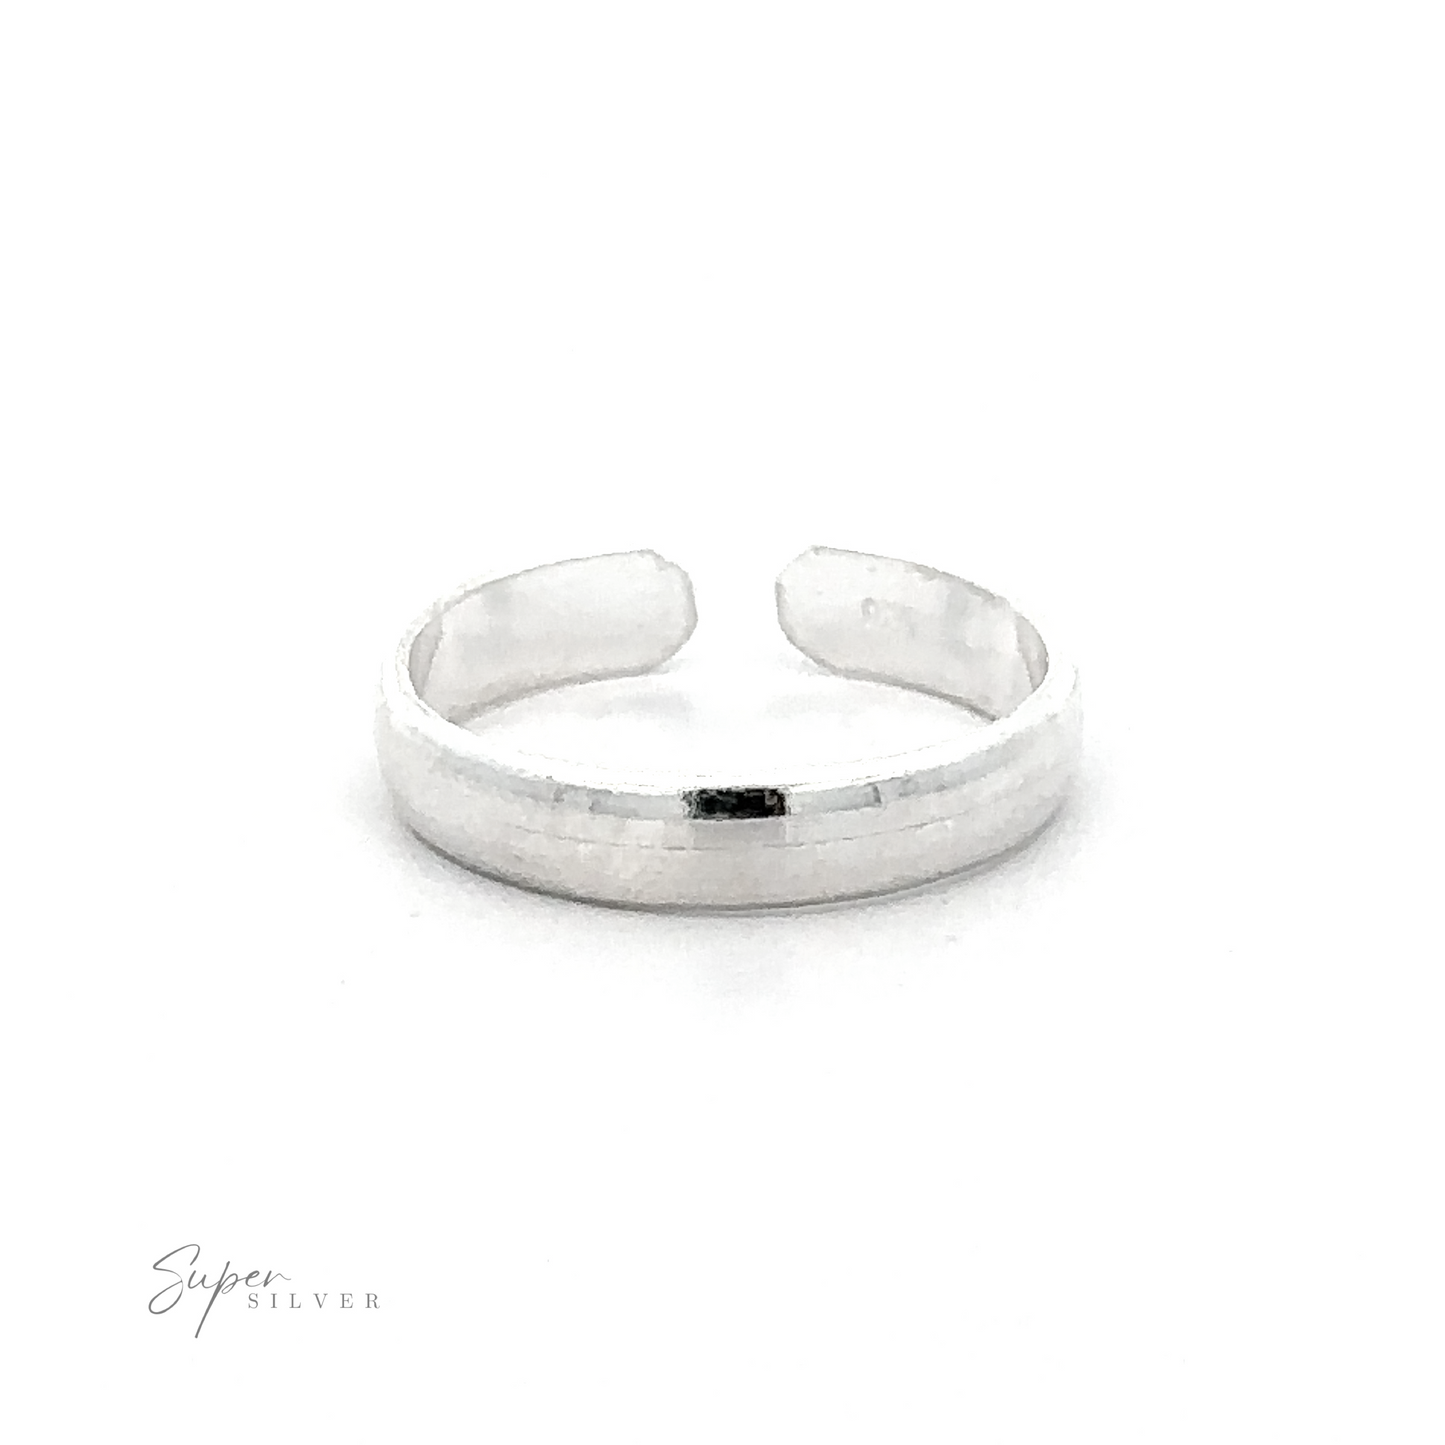 Rounded Plain Band Adjustable Toe Ring displayed on a white background.